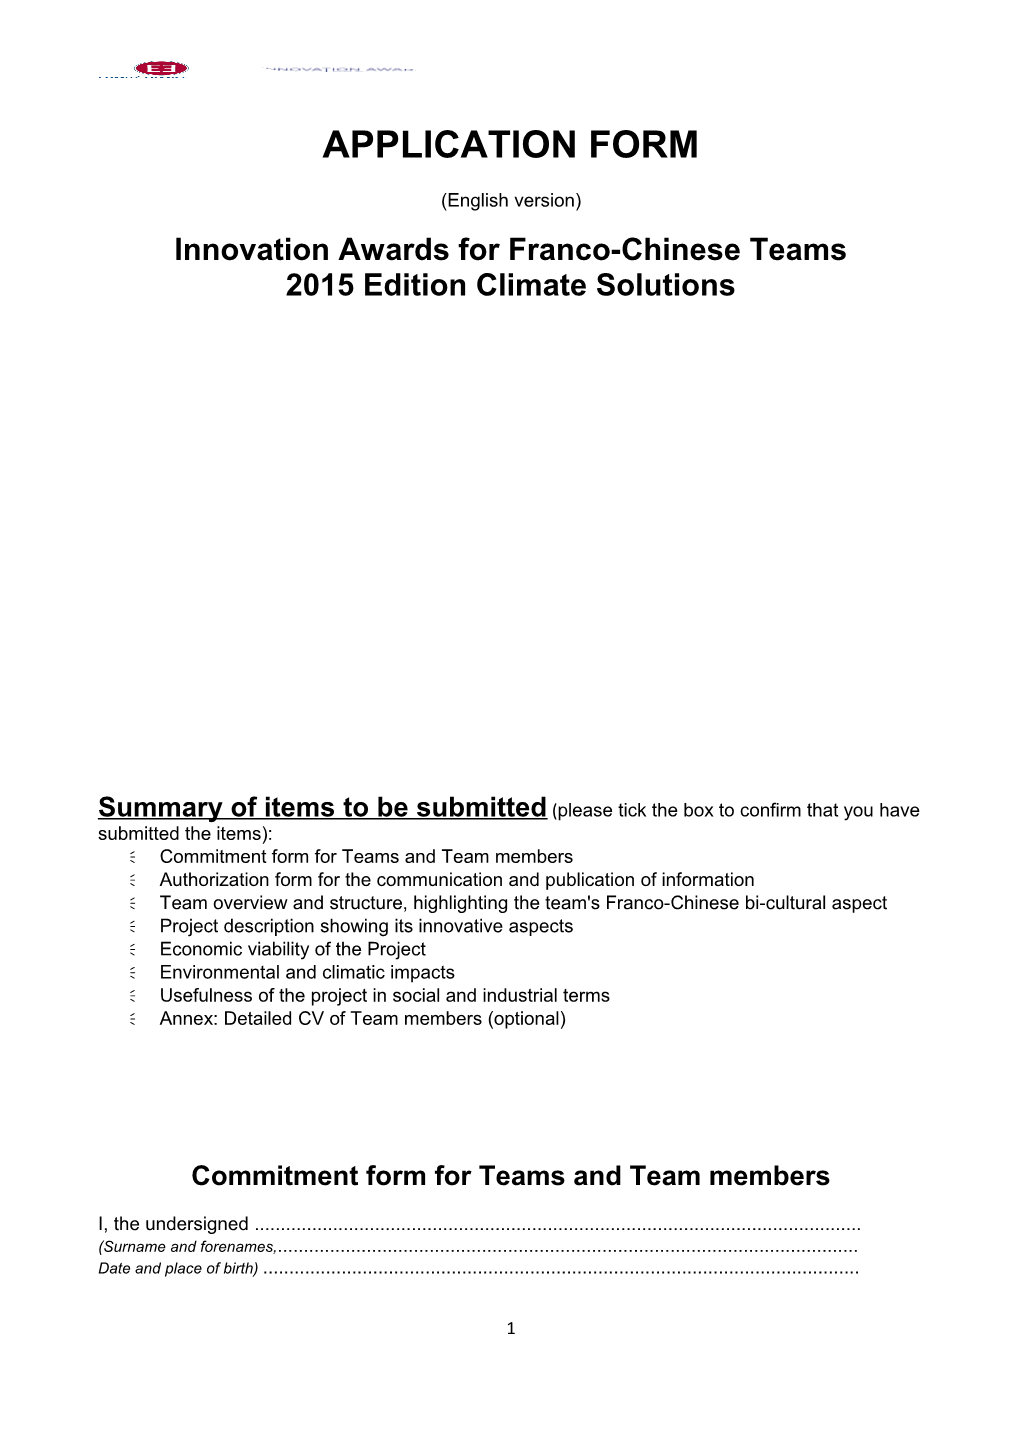 Innovation Awards for Franco-Chinese Teams